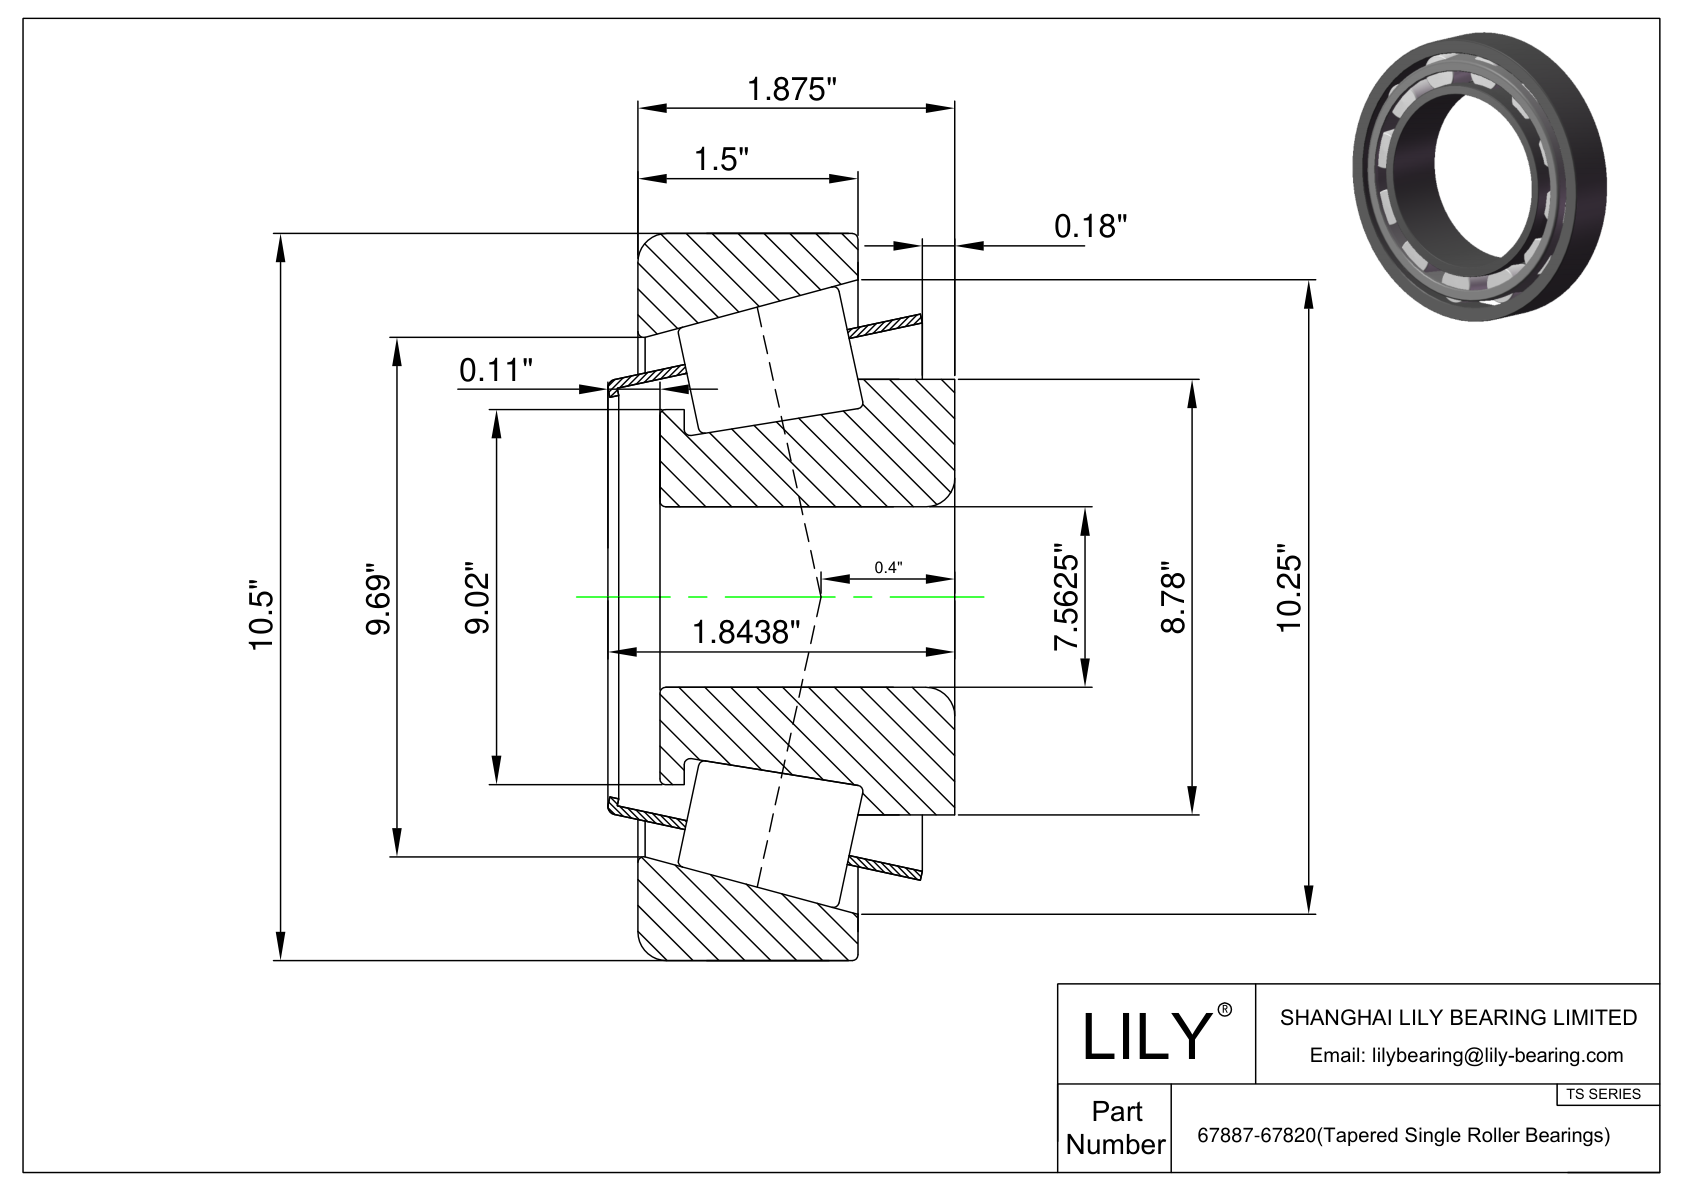 67887-67820 TS (Tapered Single Roller Bearings) (Imperial) cad drawing